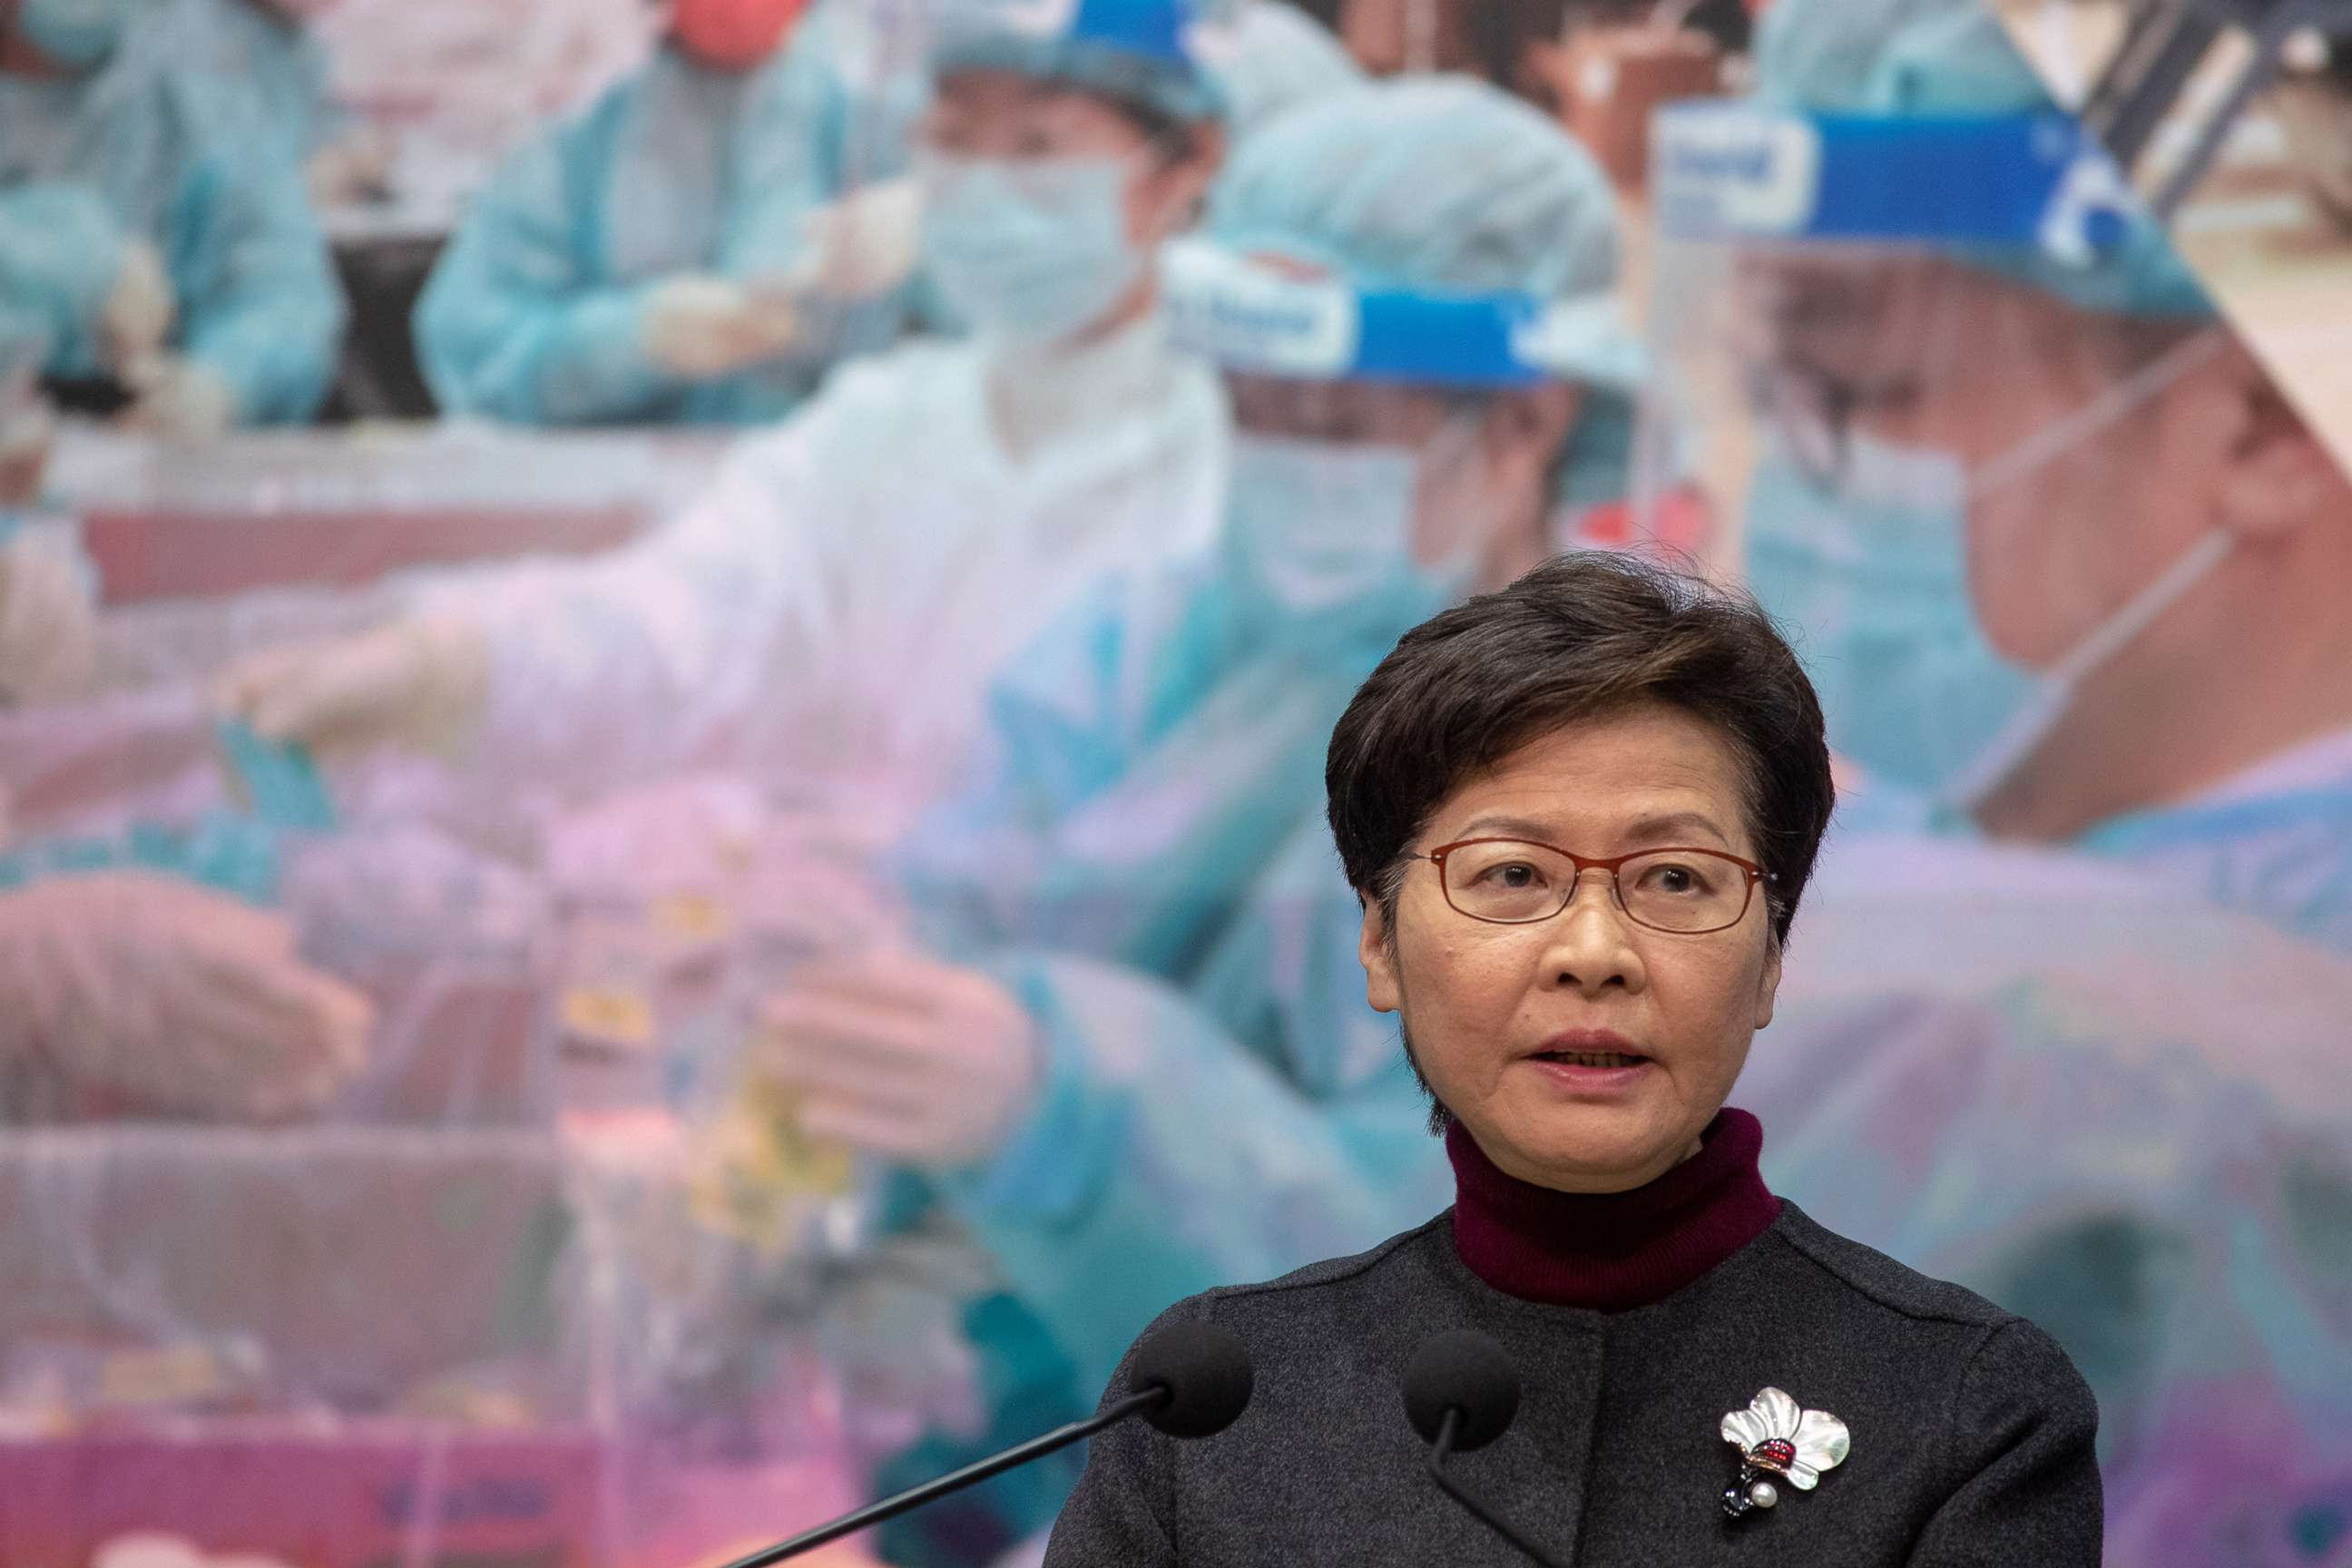 PHOTO: Hong Kong Chief Executive Carrie Lam during a news conference on Feb. 8, 2022 in Hong Kong.